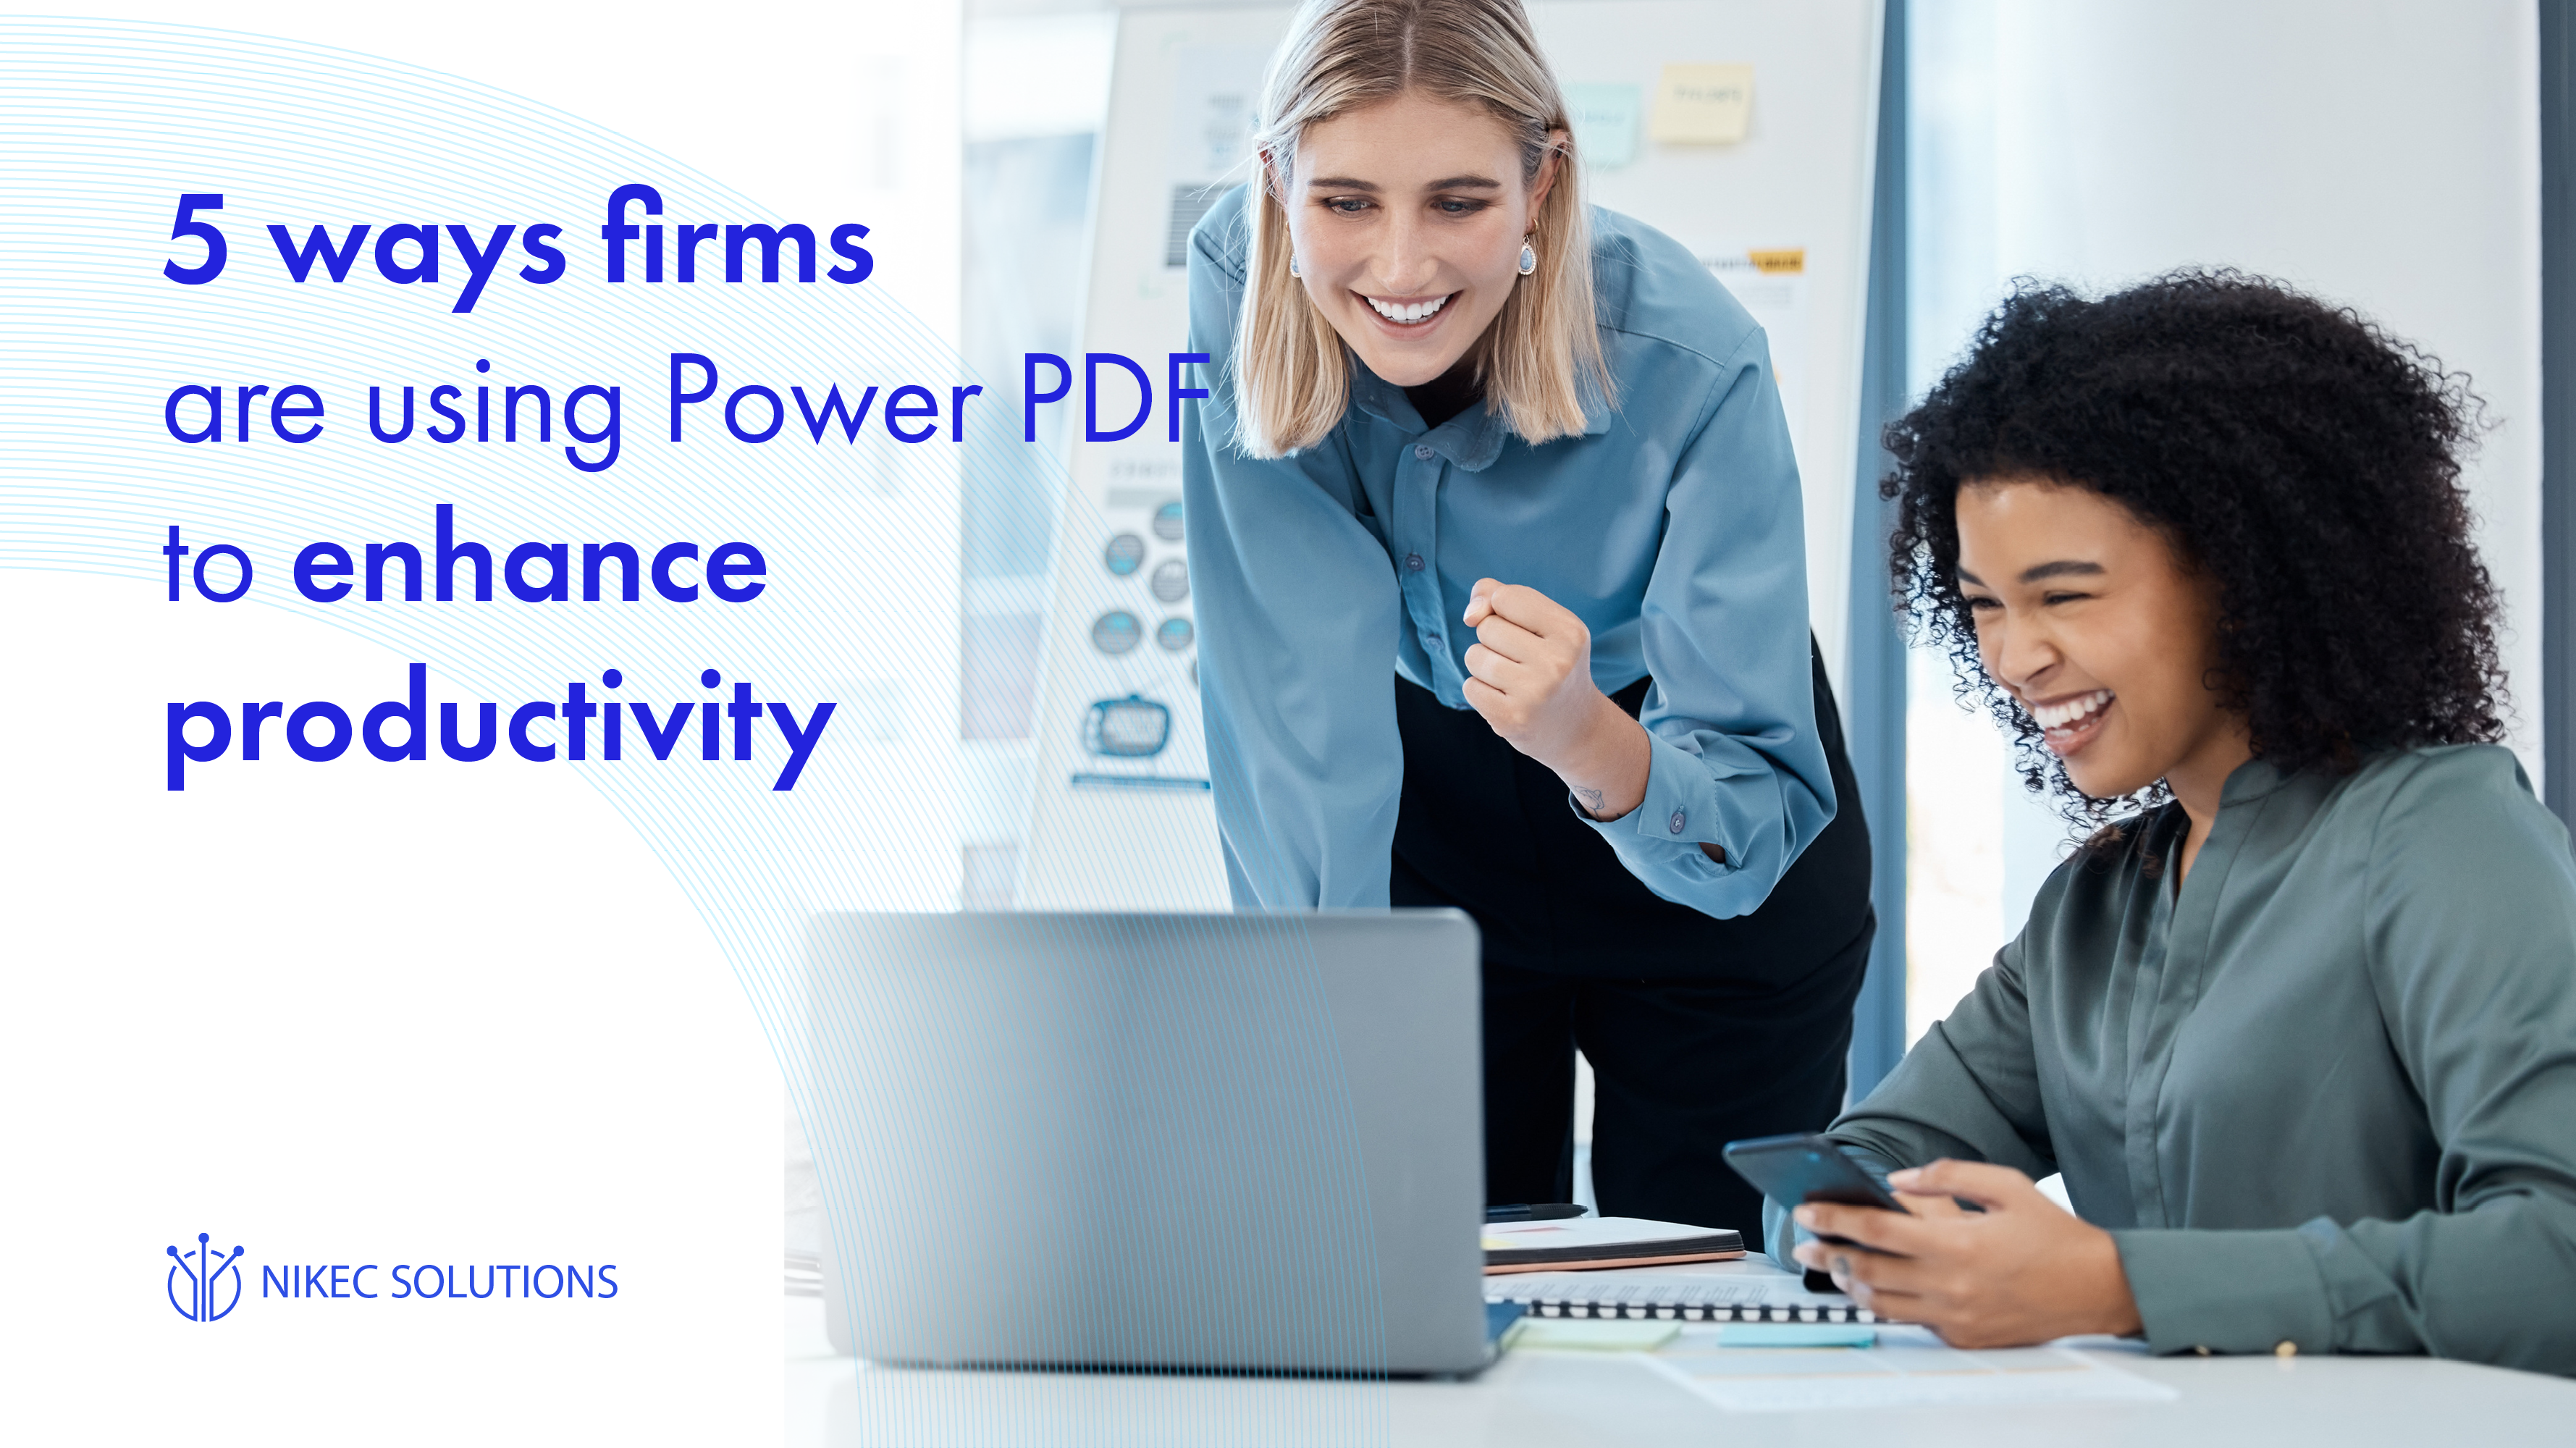 During the webinar, David demonstrates how firms can use Power PDF to enhance productivity & how they each feature help firms work smarter.